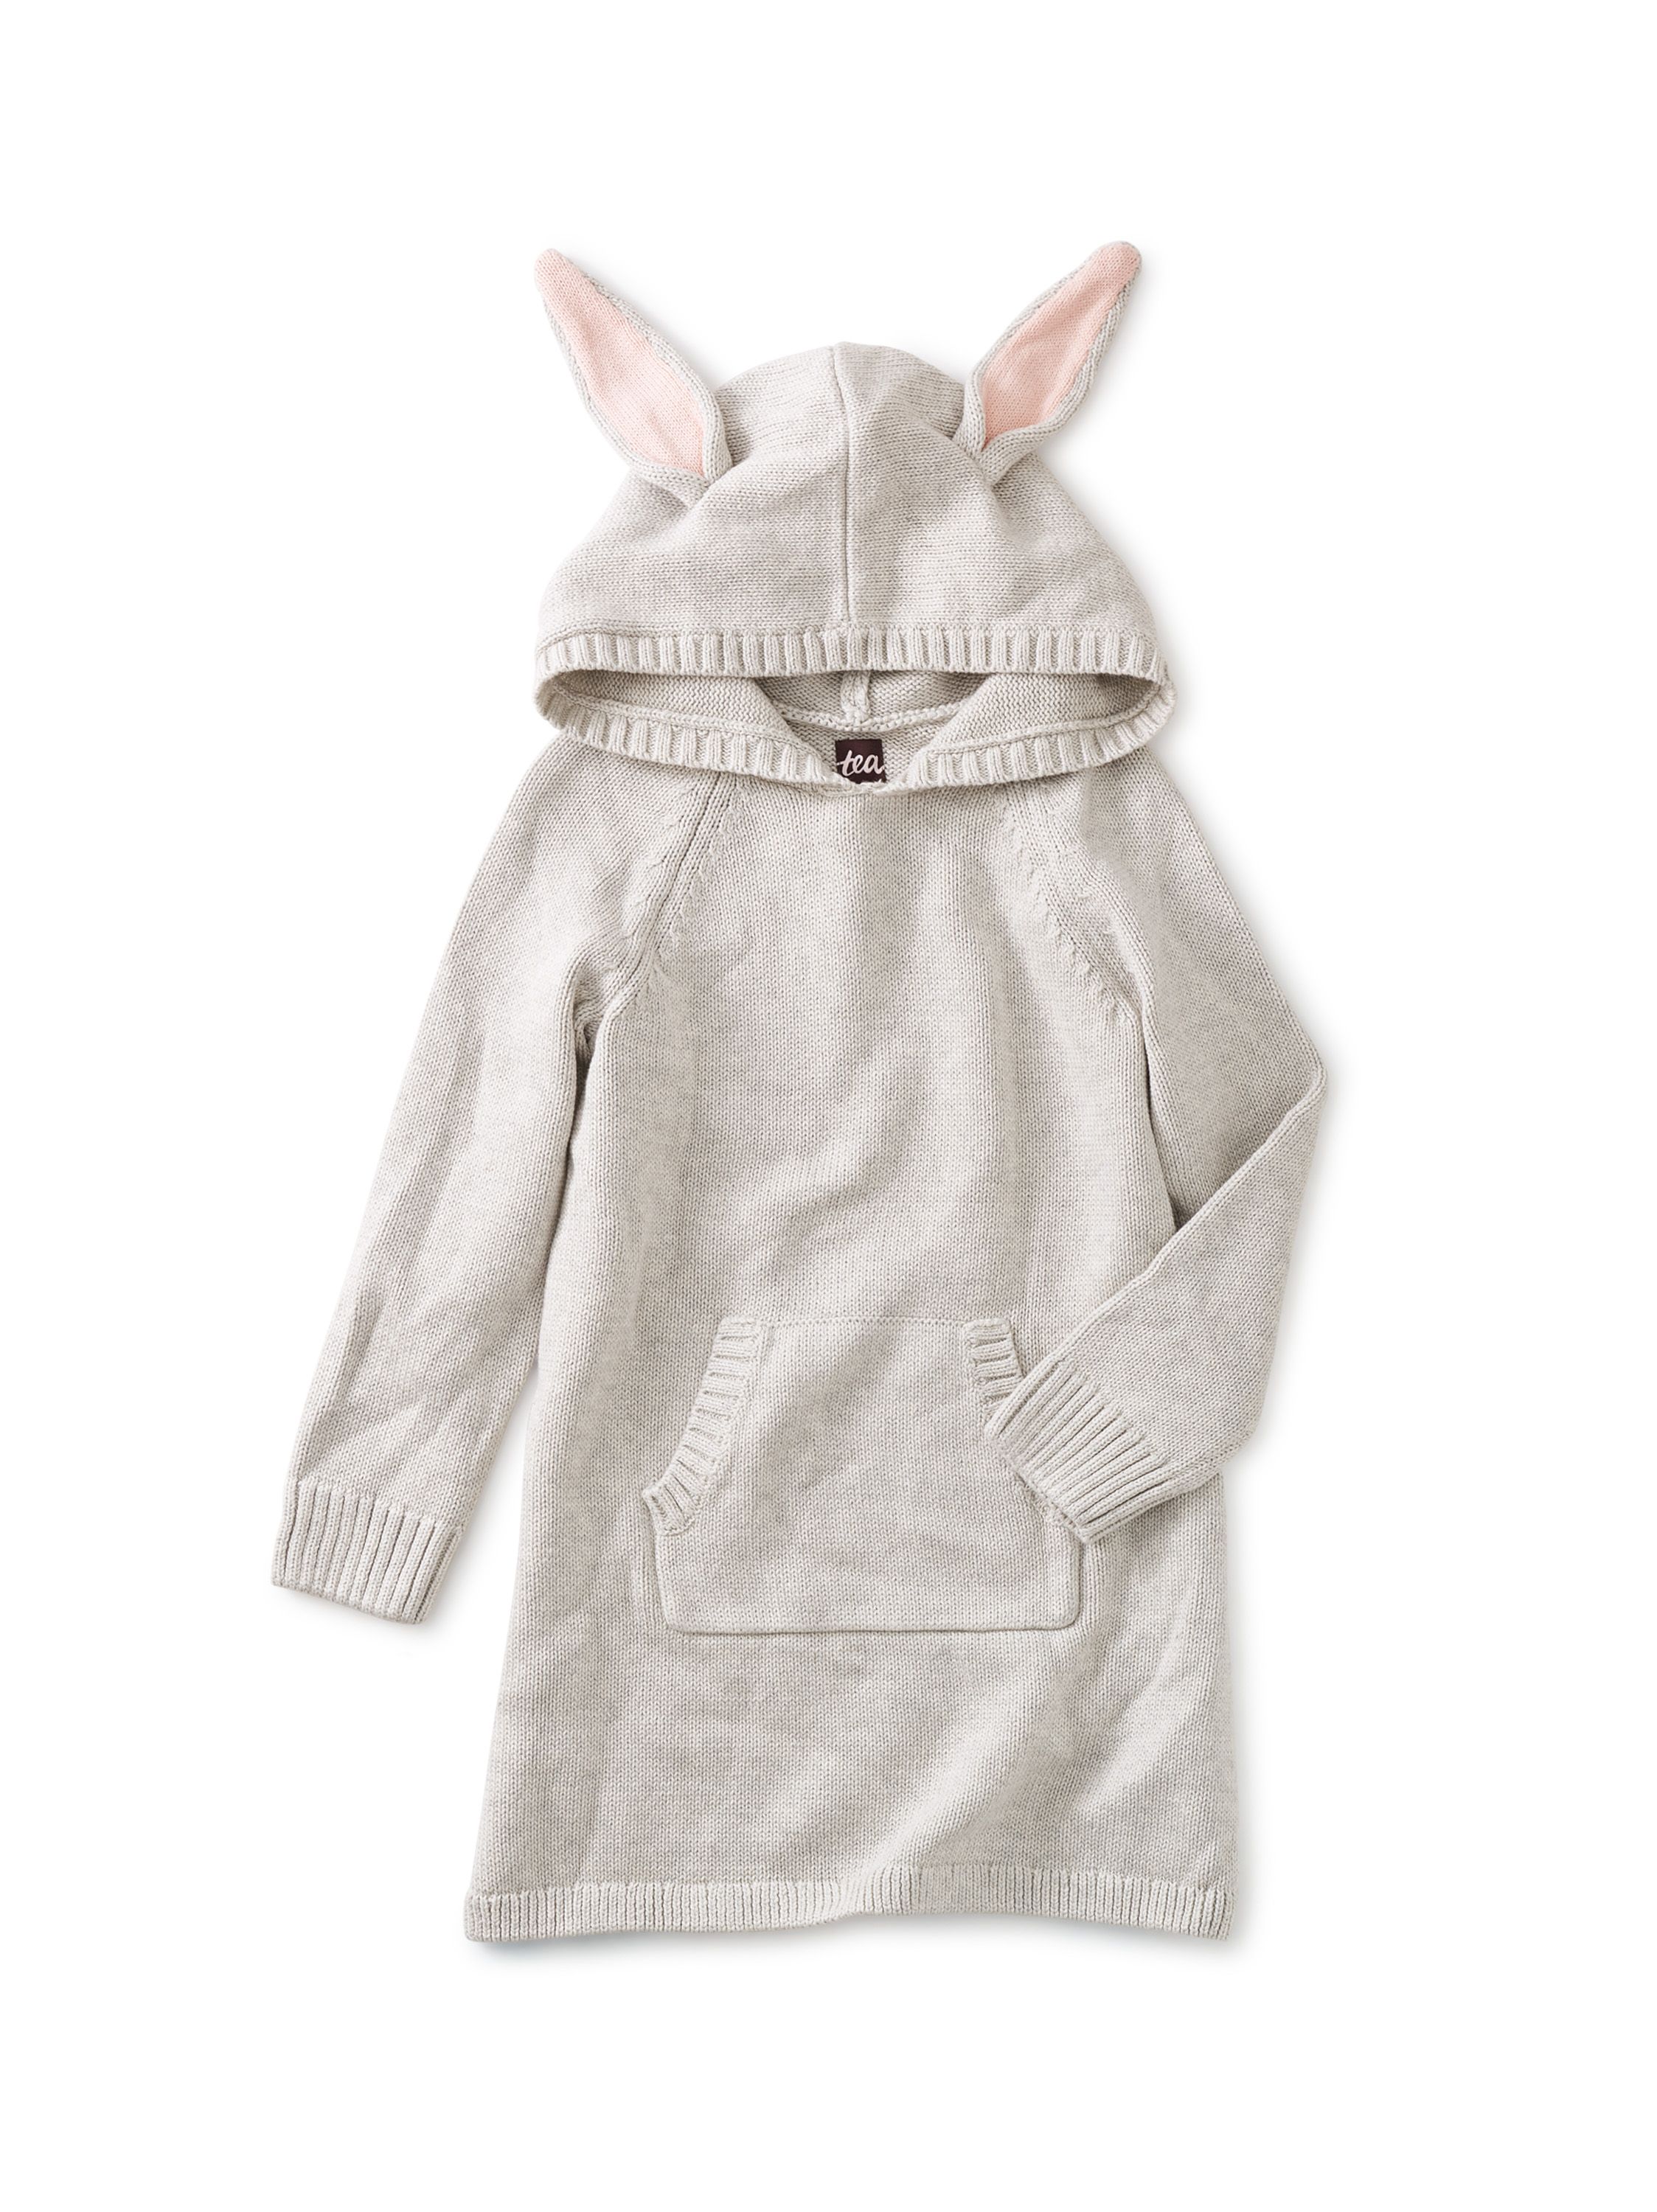 Funny Bunny Sweater Dress | Tea Collection